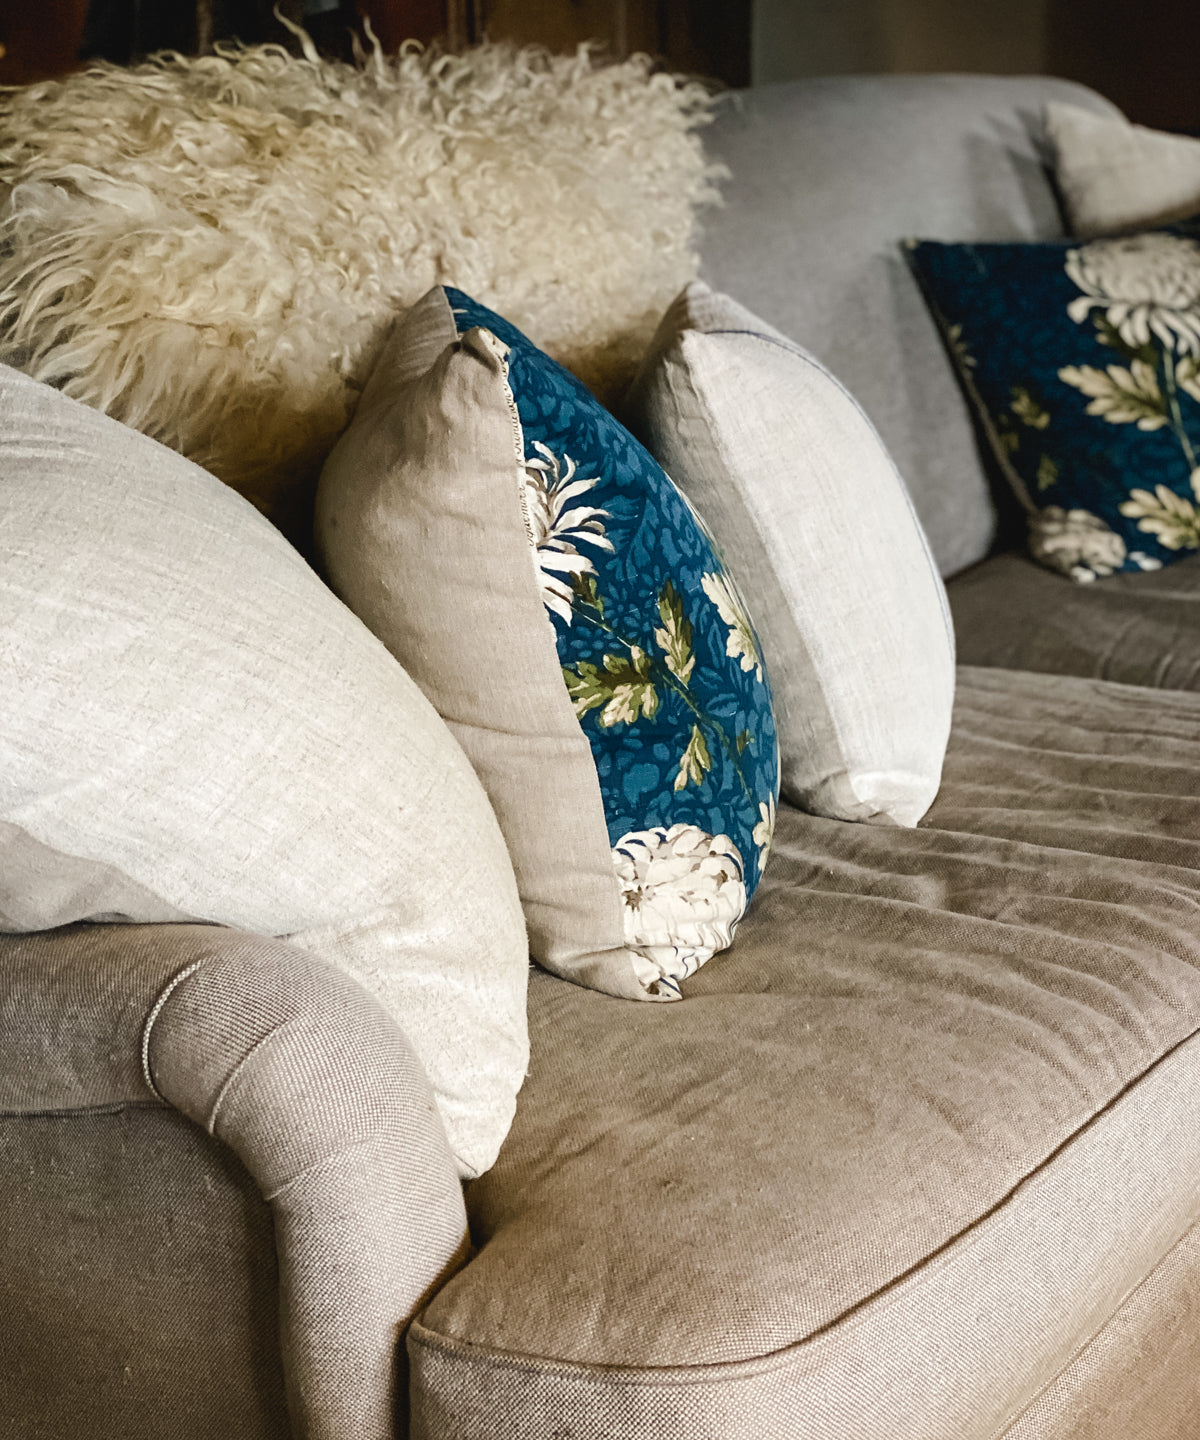 Floral and white throw pillows on a couch, felted sheep rug draped over the back of couch.